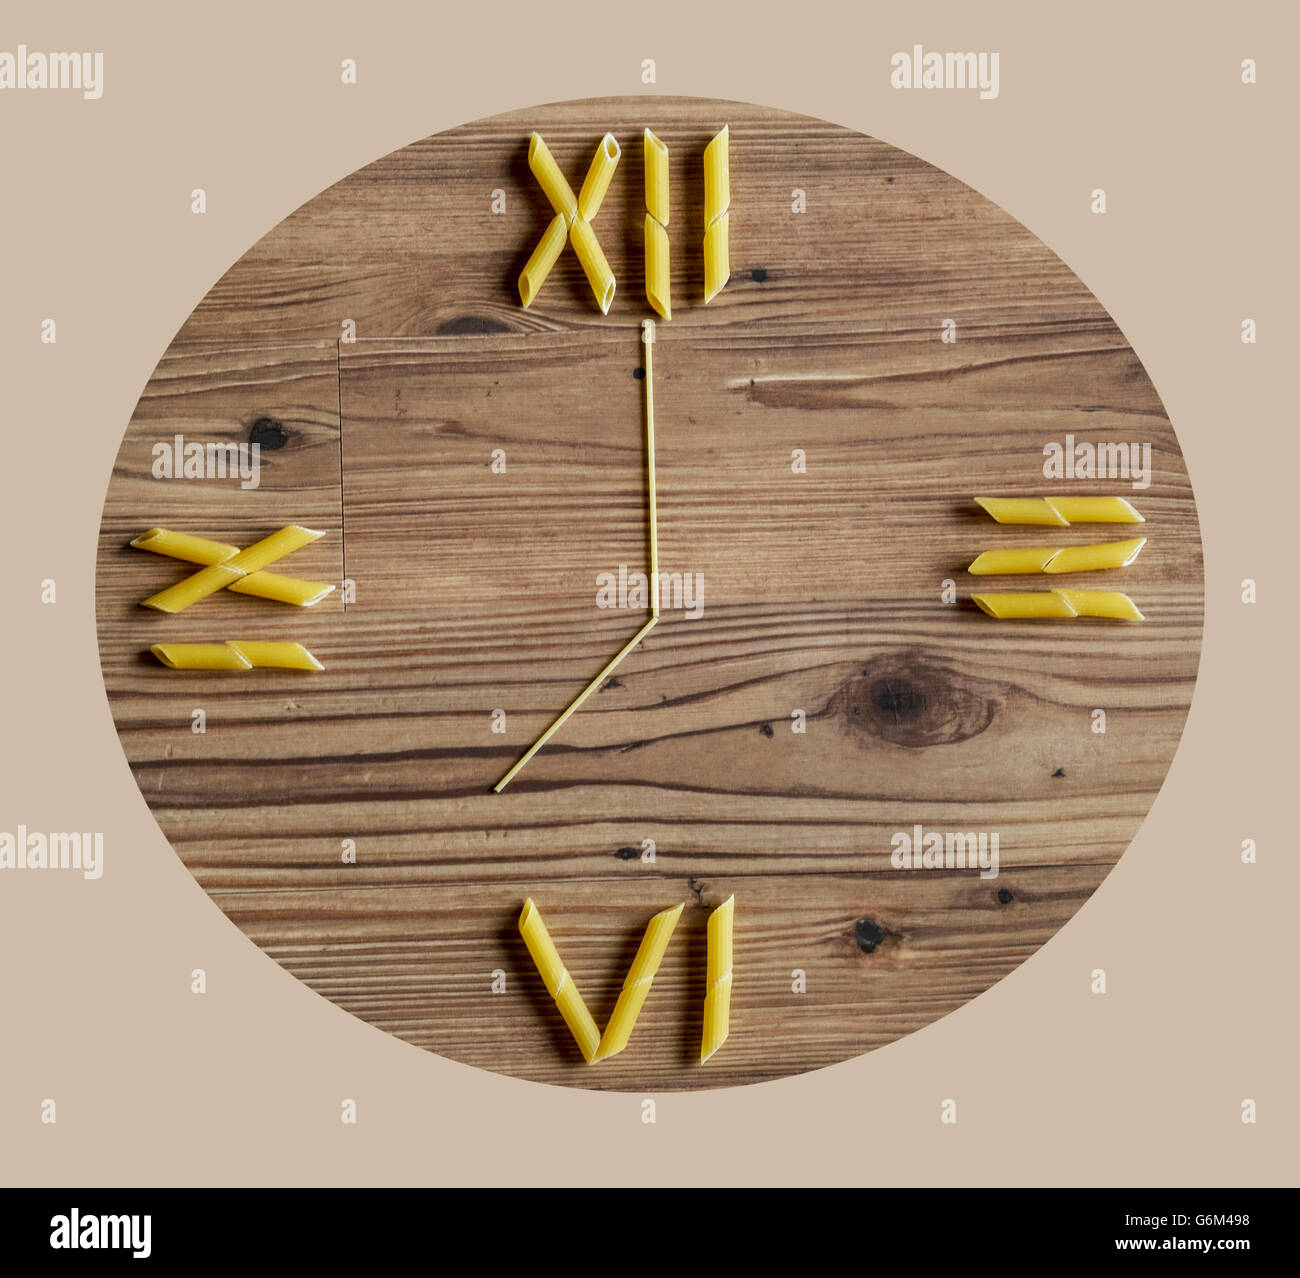 Penne pasta and spaghetti laid out on wooden background as a clock Stock Photo